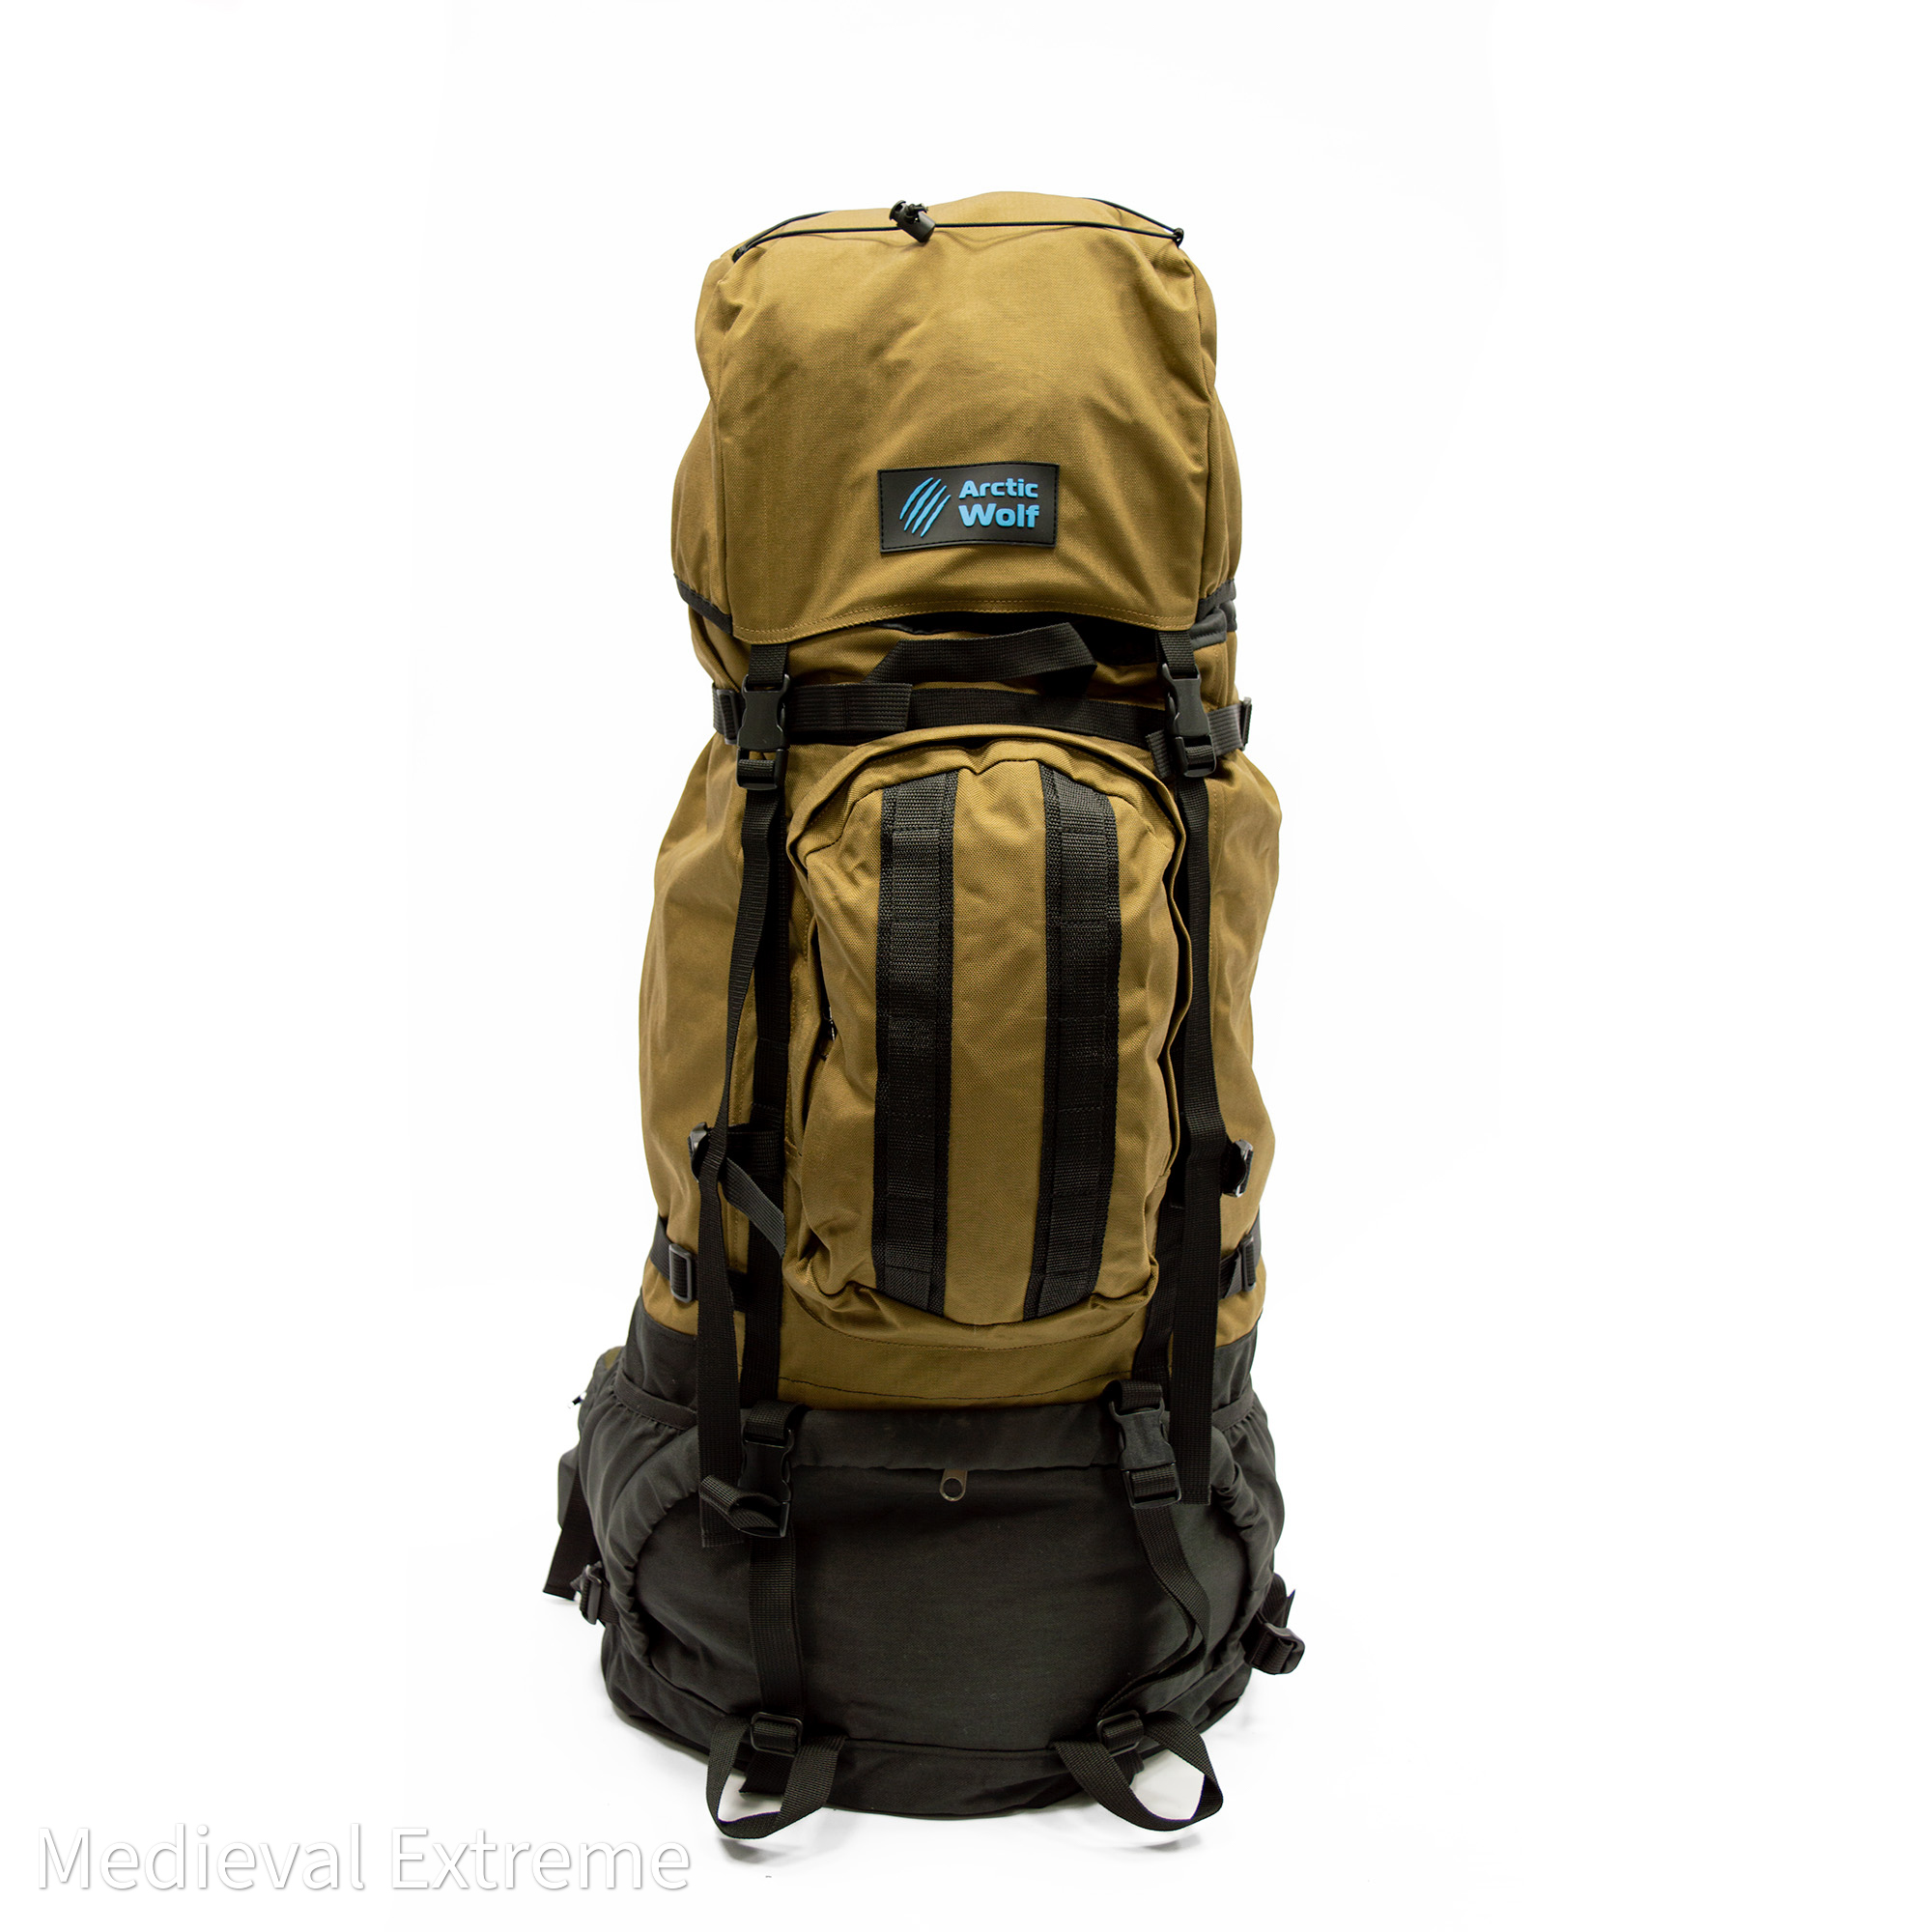 Backpack for armor 125 liters coyote brown front